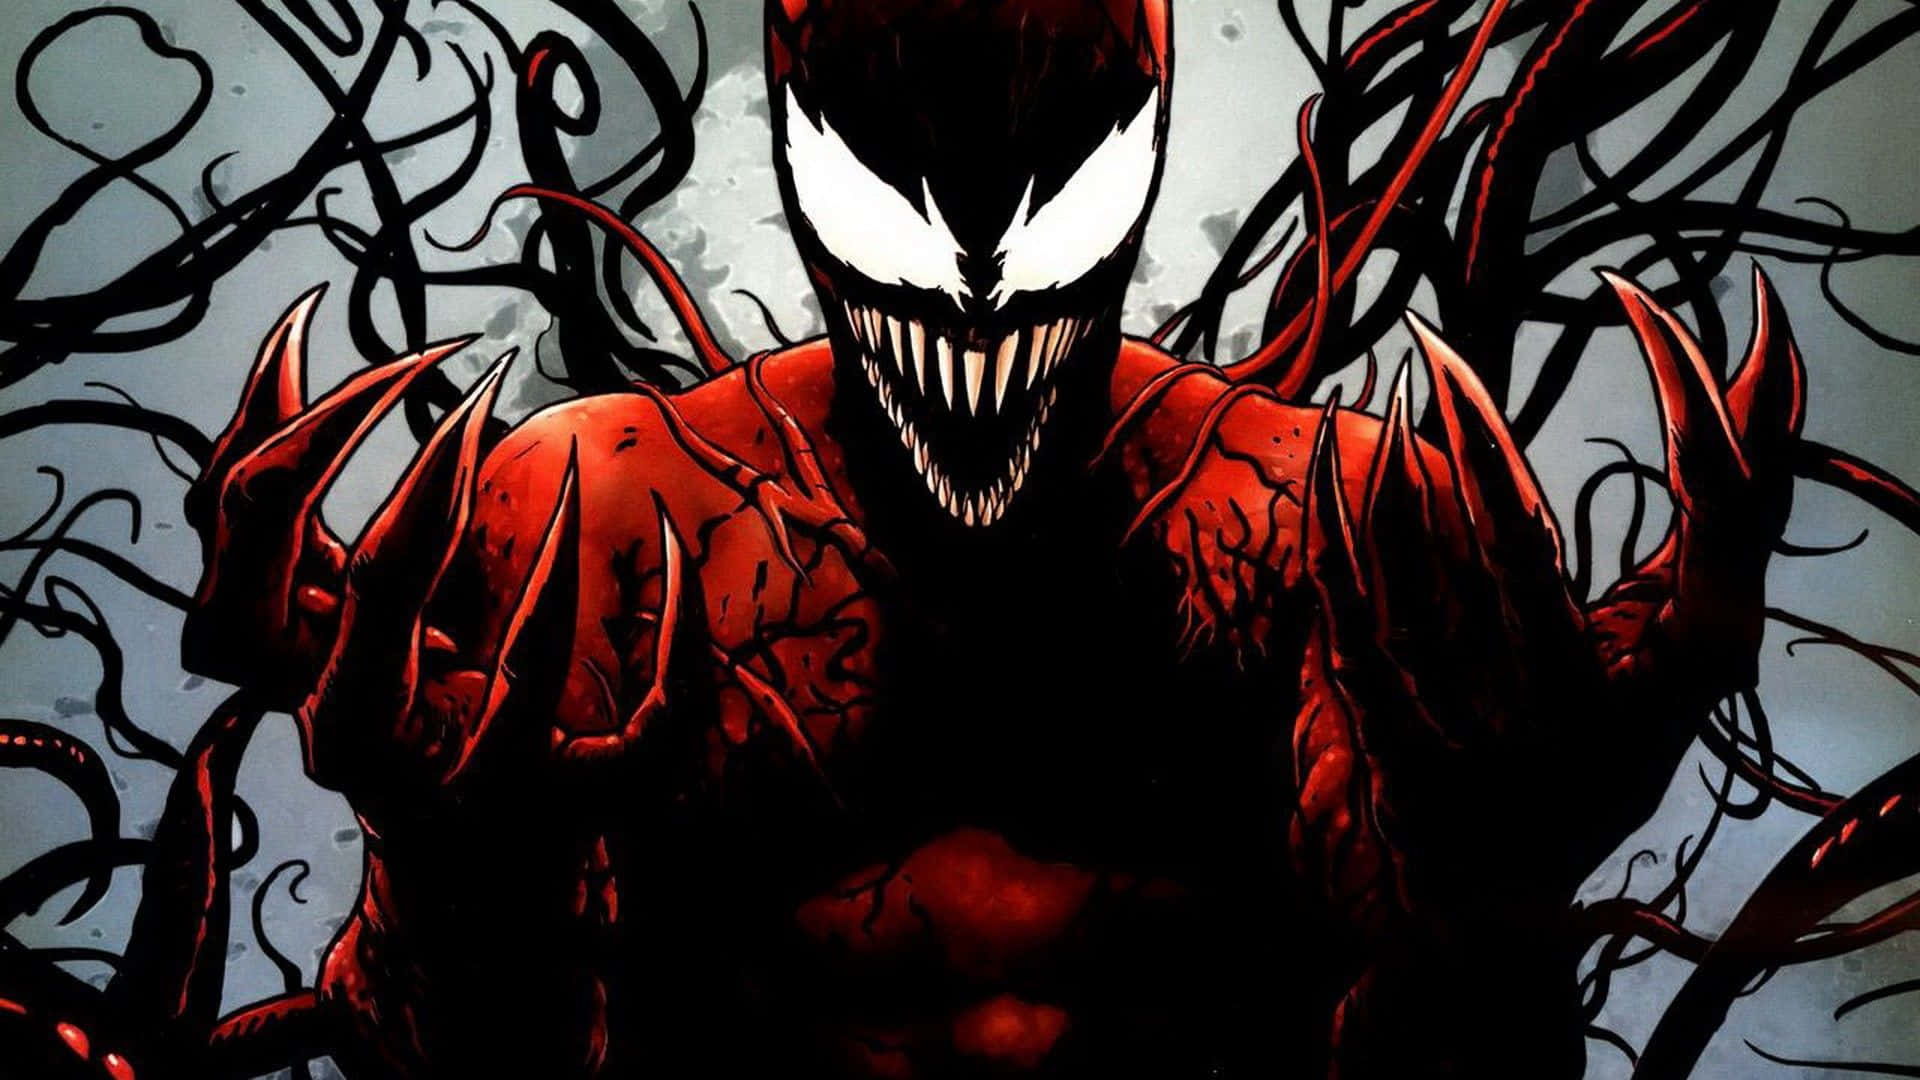 Image  The Symbiote Terror, Marvel Carnage Wallpaper